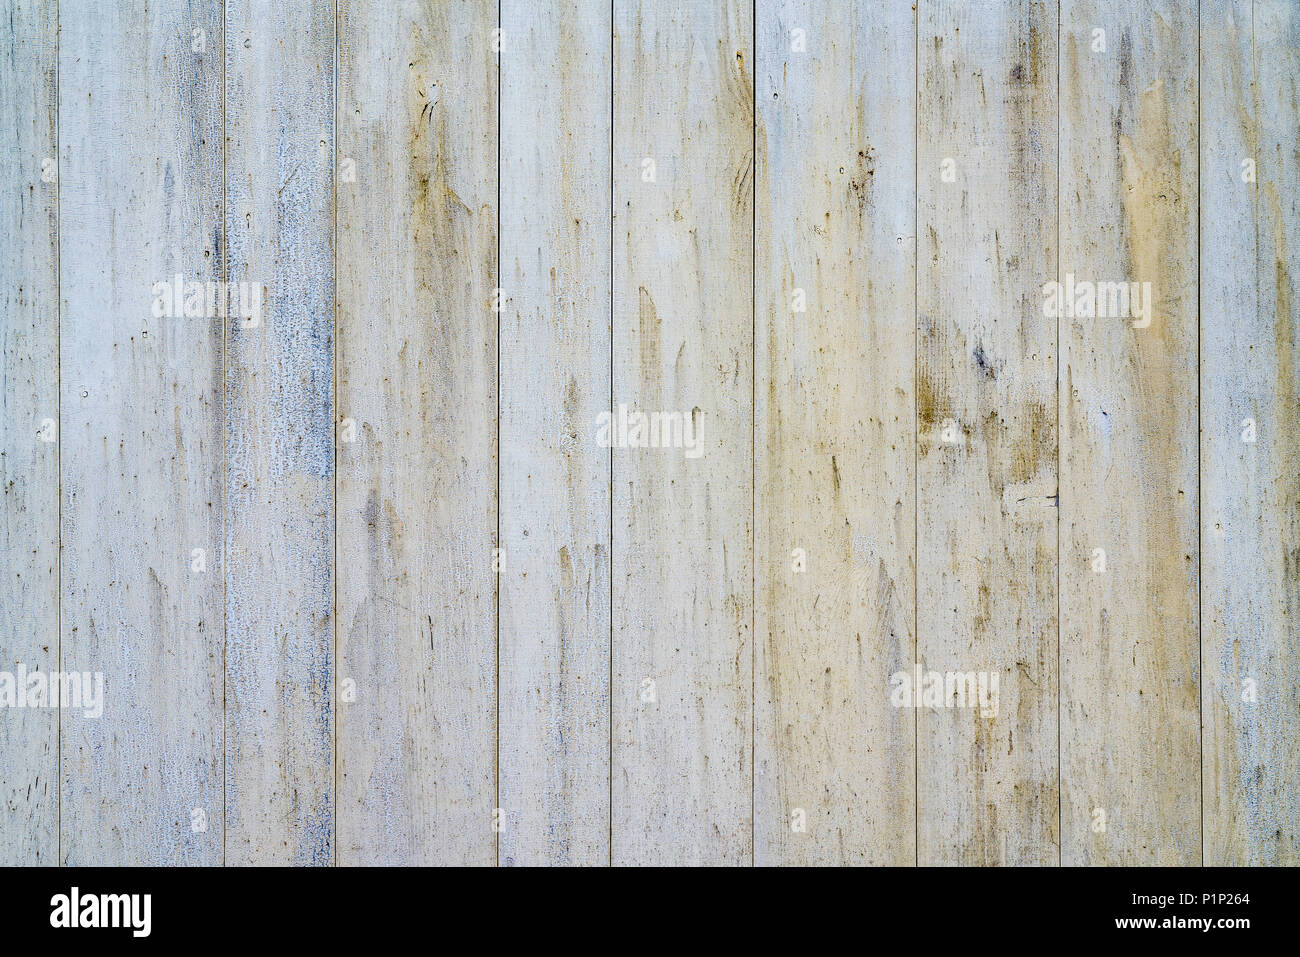 Old Weathered White Barn Siding Planks with Peeling Paint Stock Photo